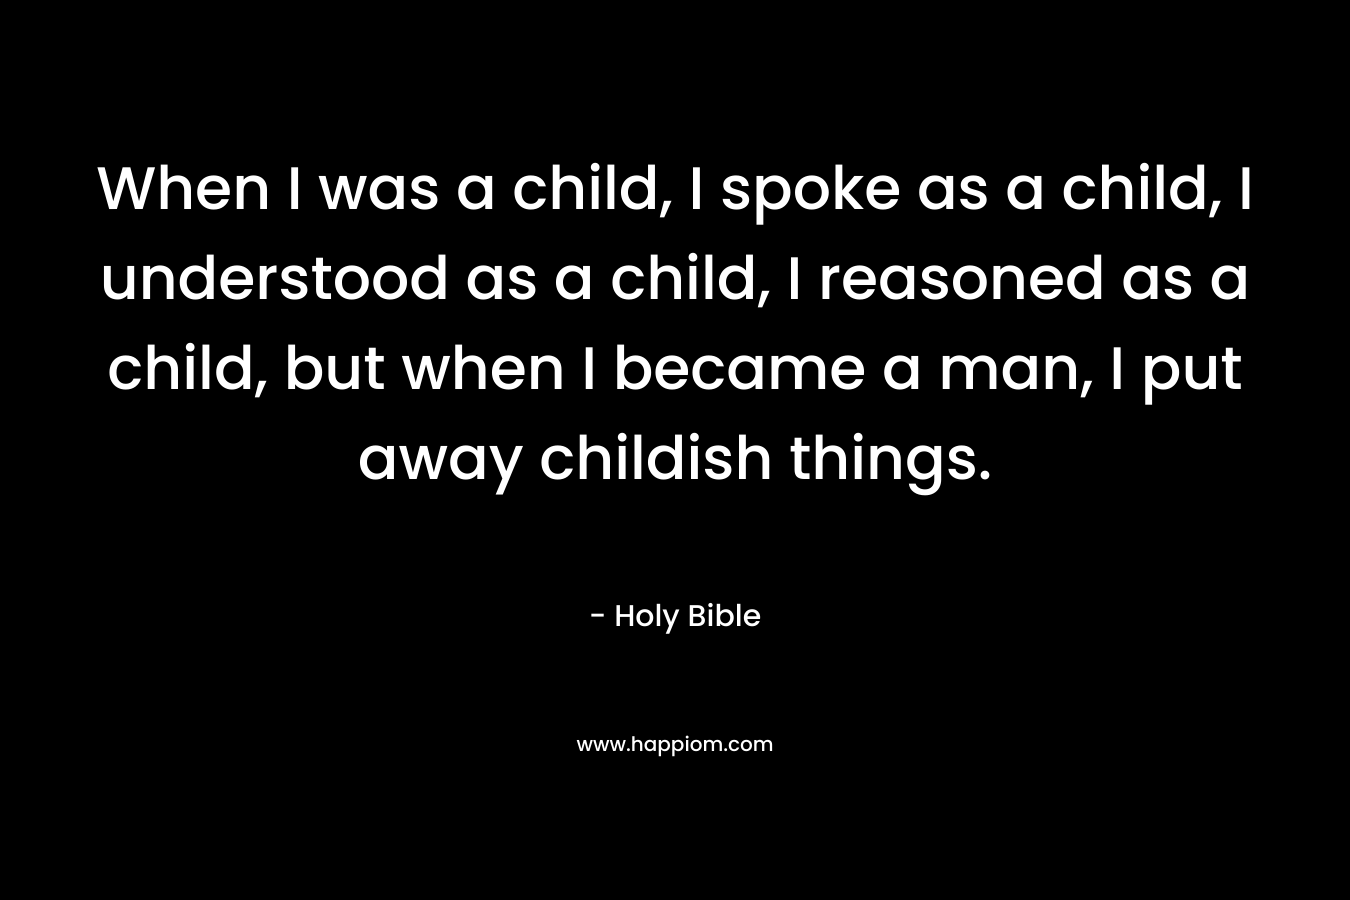 When I was a child, I spoke as a child, I understood as a child, I reasoned as a child, but when I became a man, I put away childish things. – Holy Bible